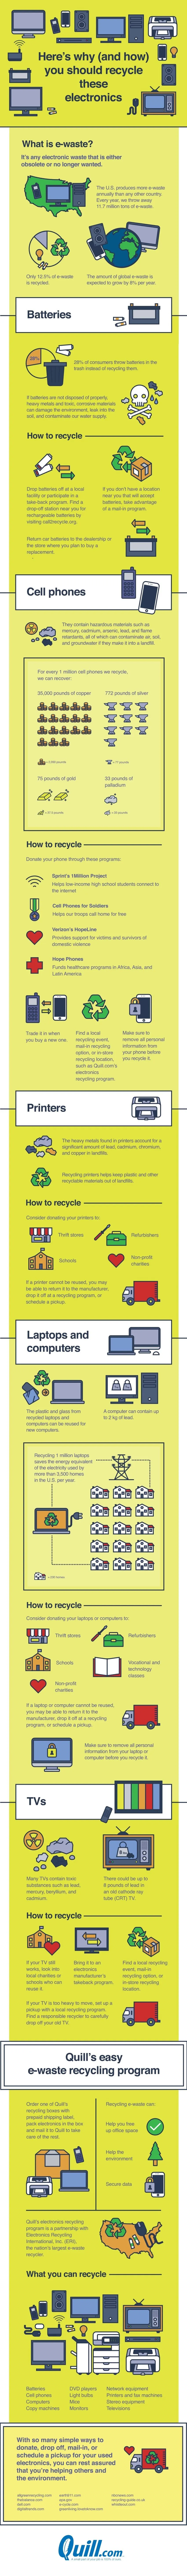 How to Recycle Electronics And Why You Should - #infographic